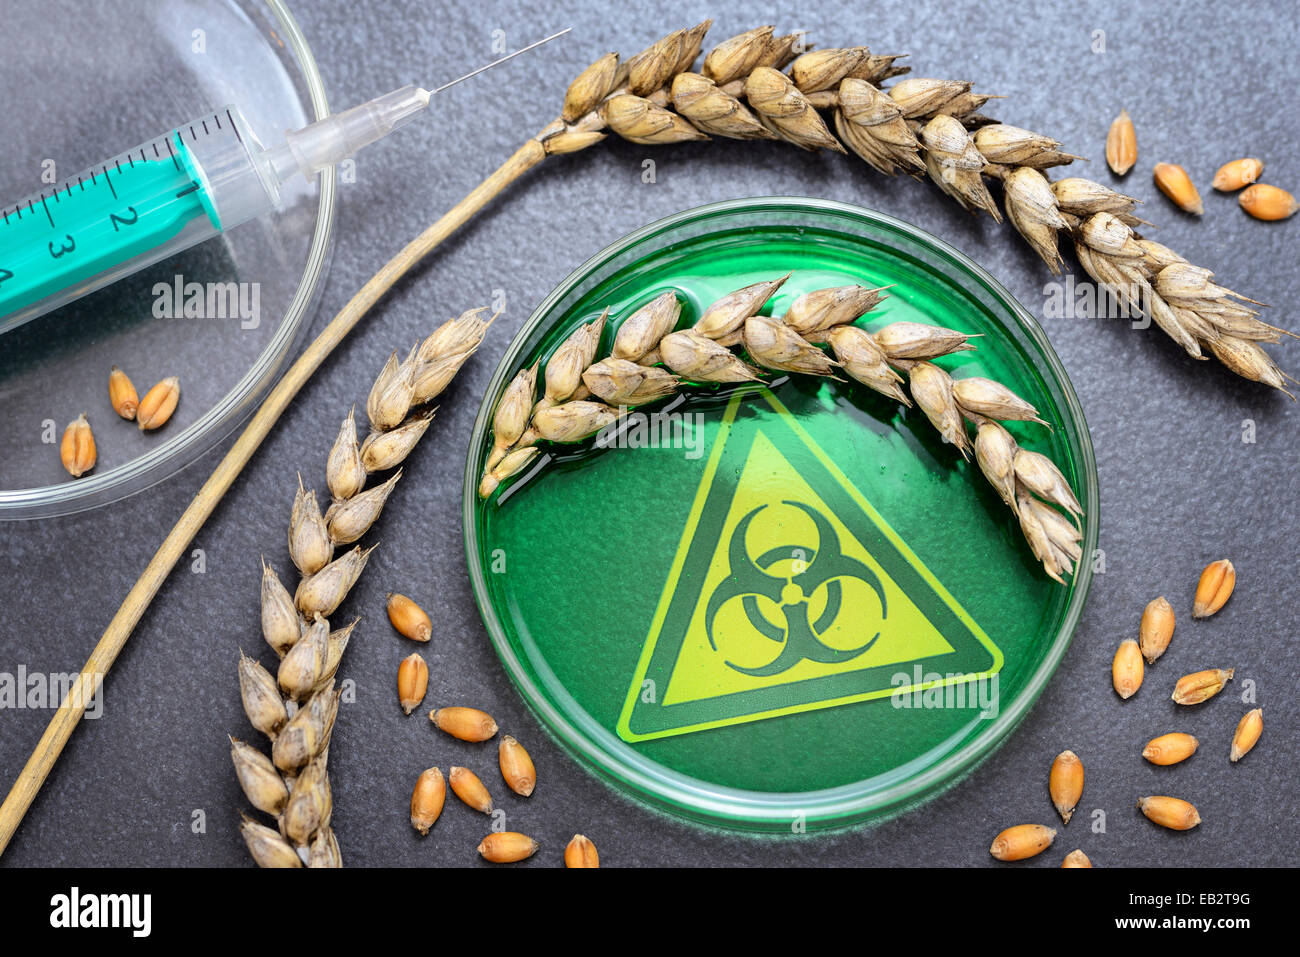 Petri dish with ears of wheat, symbolic image for genetically modified wheat, Germany Stock Photo